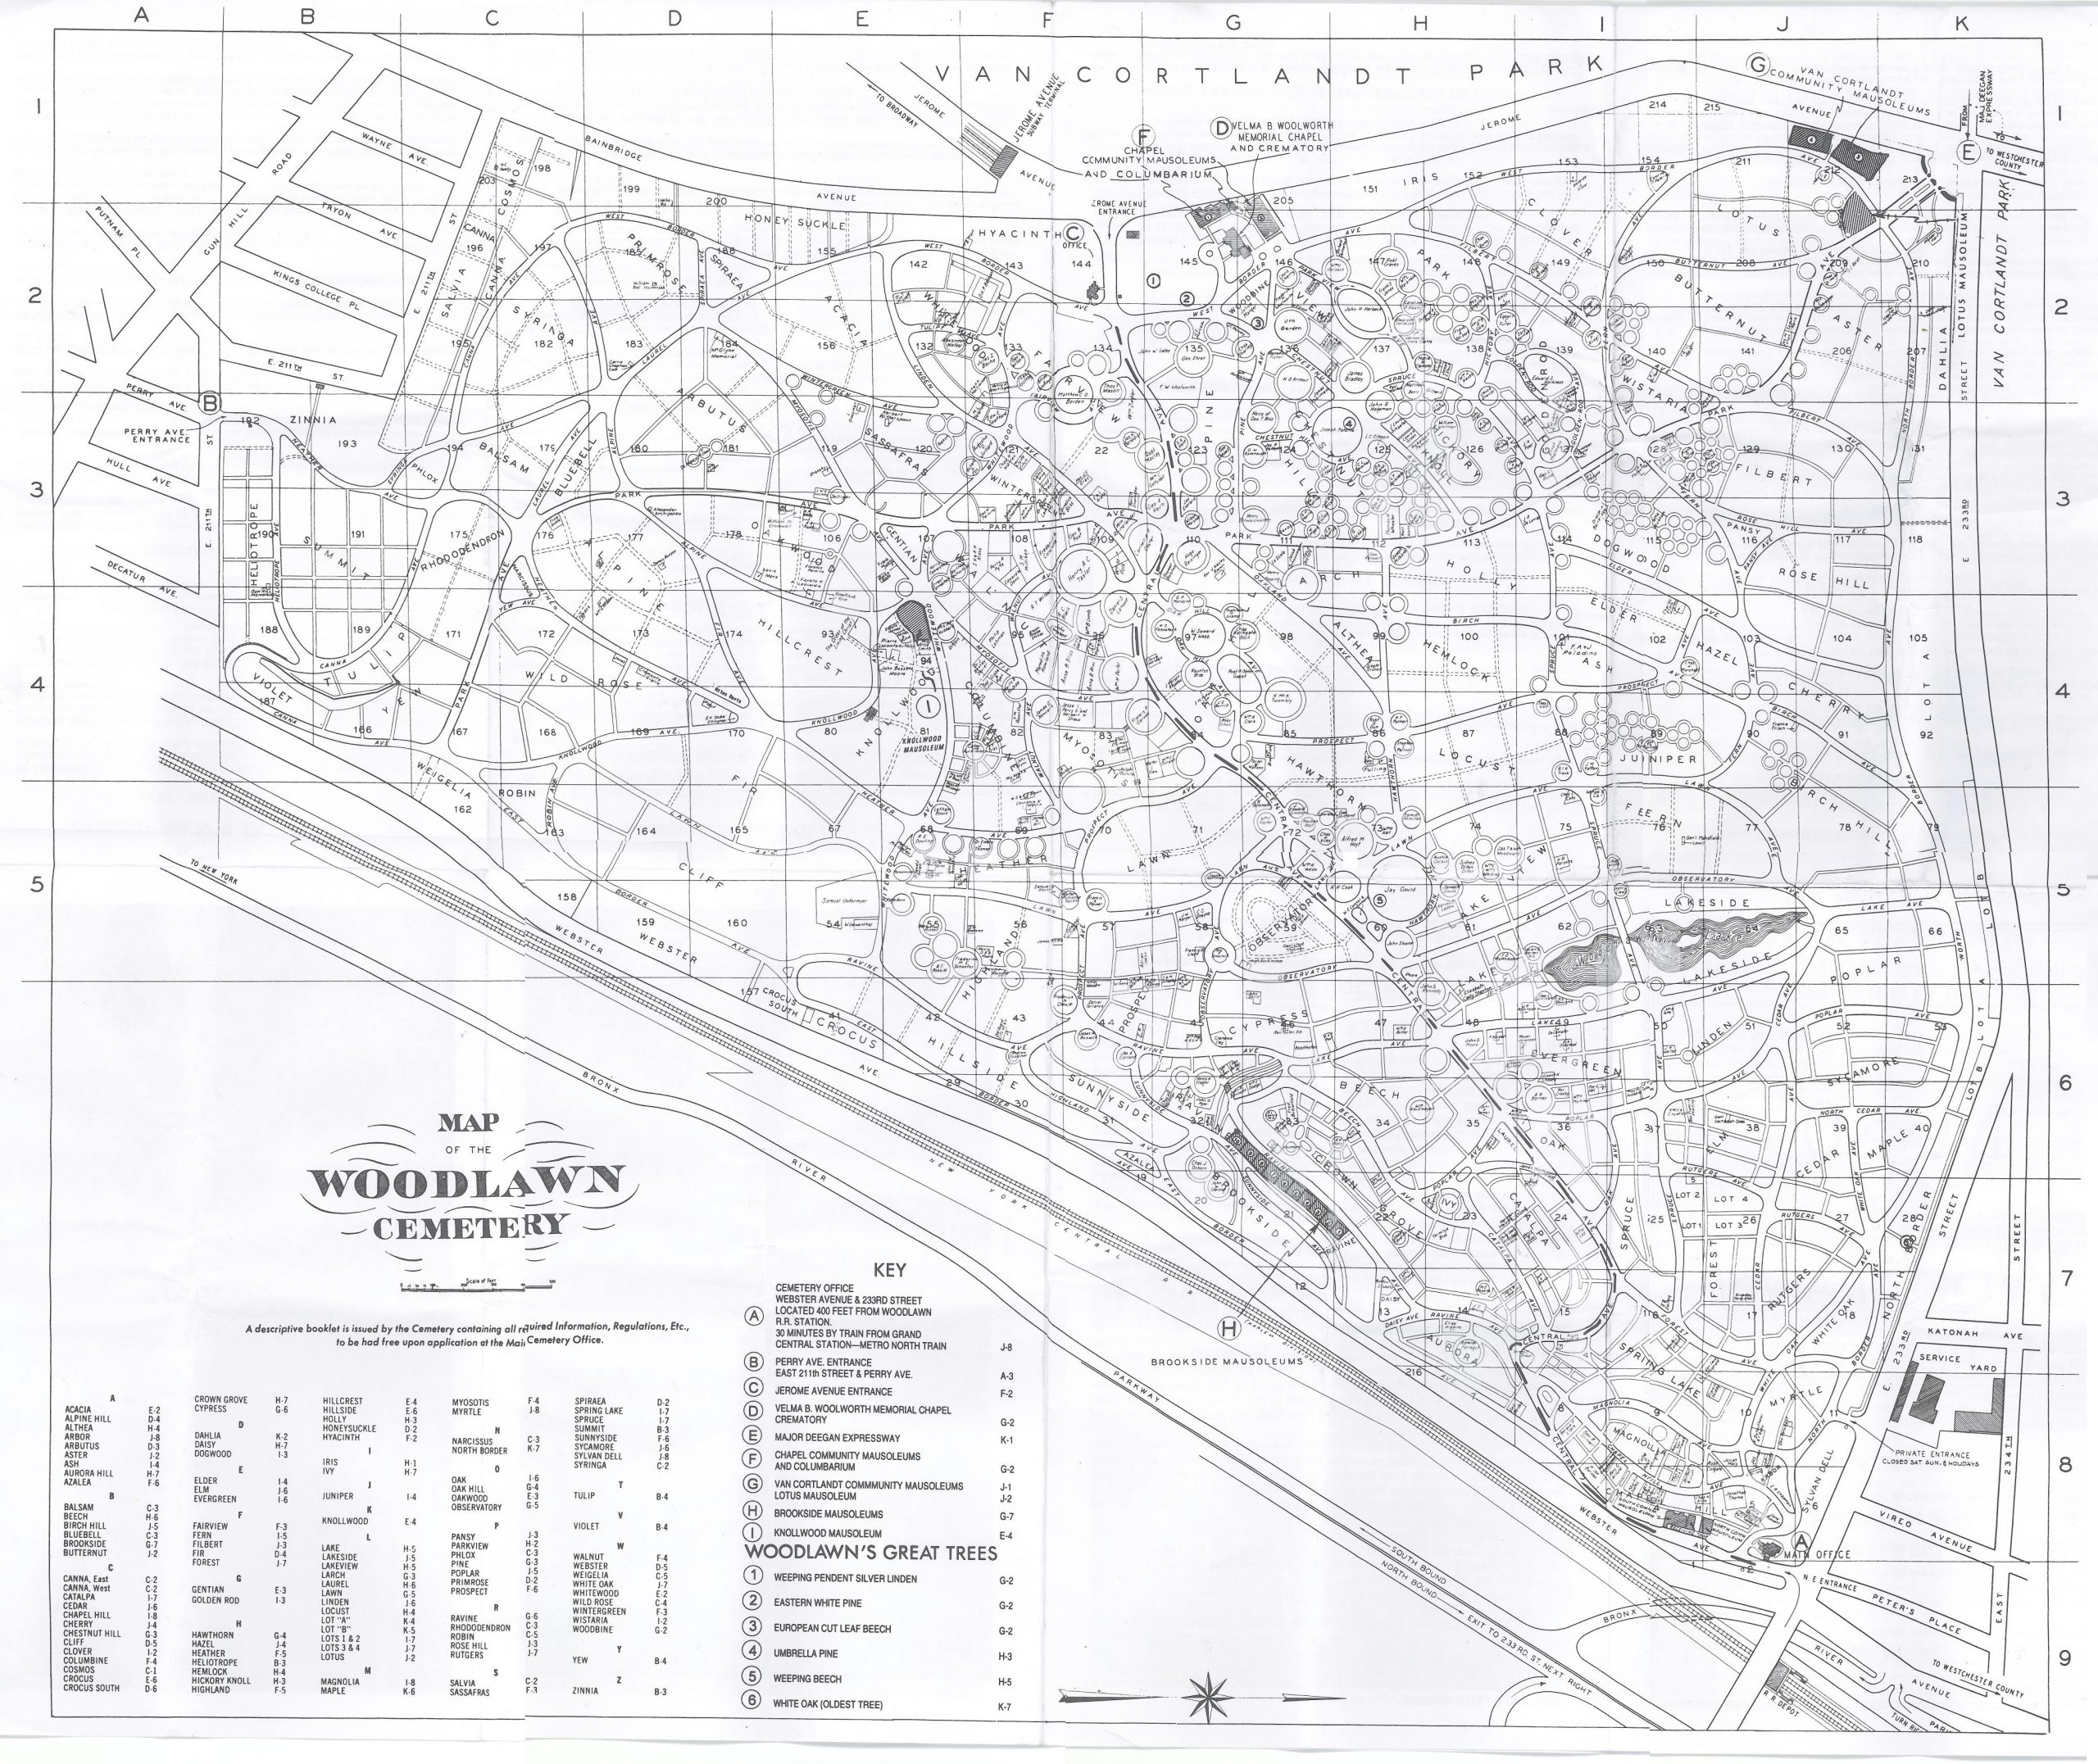 Cemetery map of Woodlawn Cemetery in the Bronx, New York.